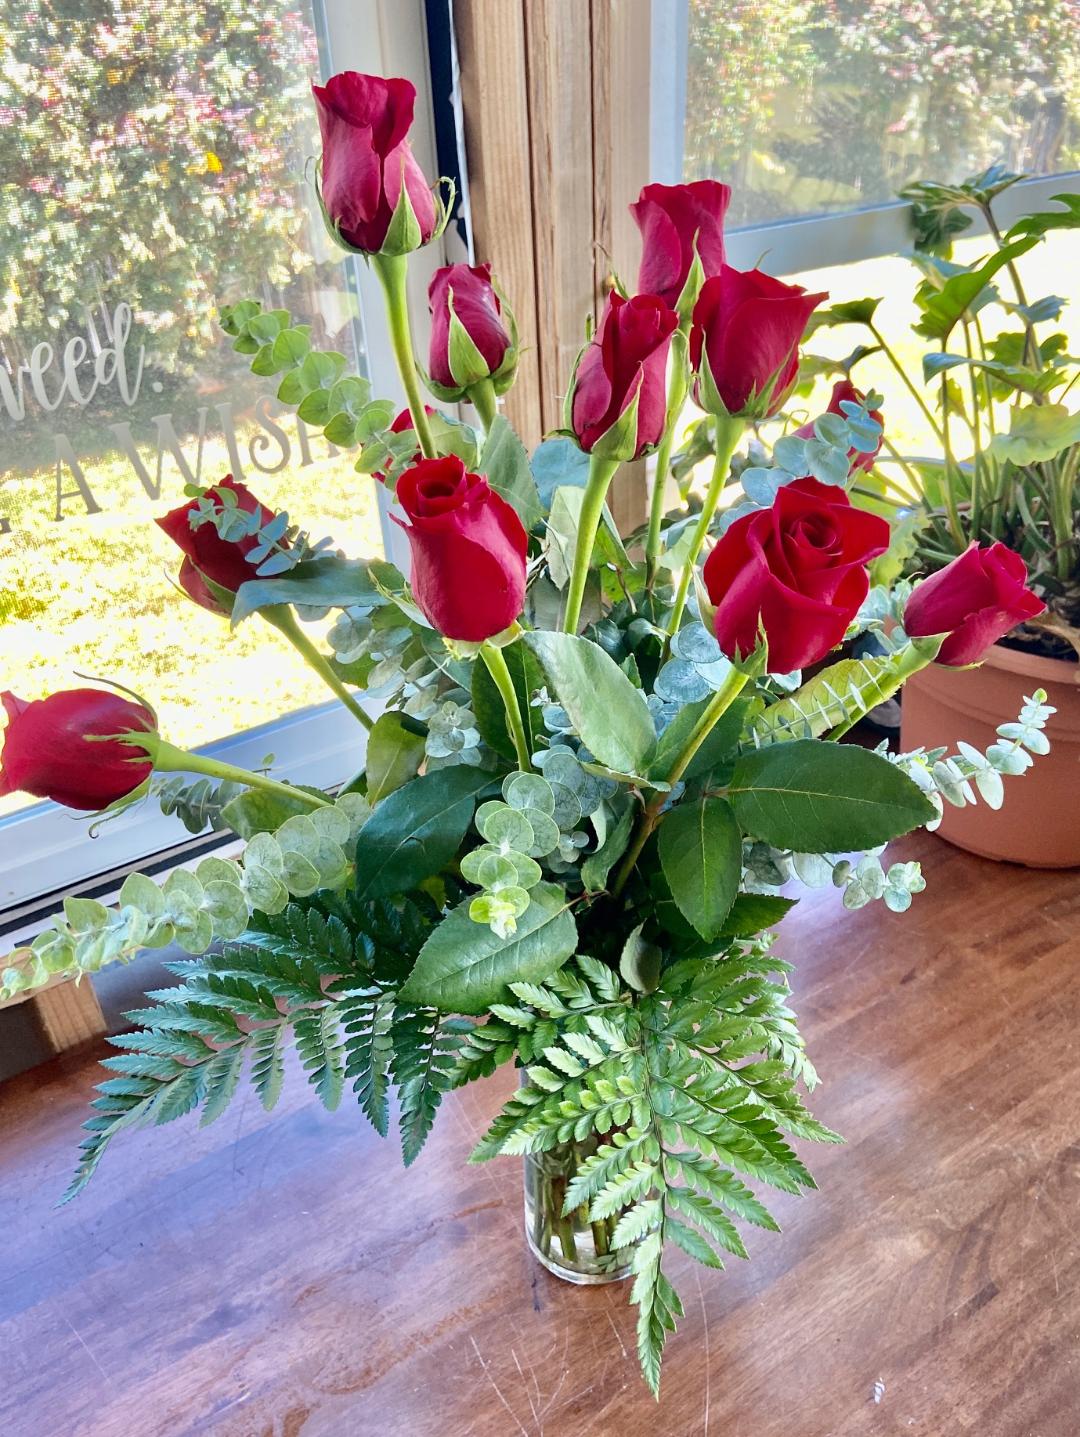 Roses Arrangements ~ Red or White